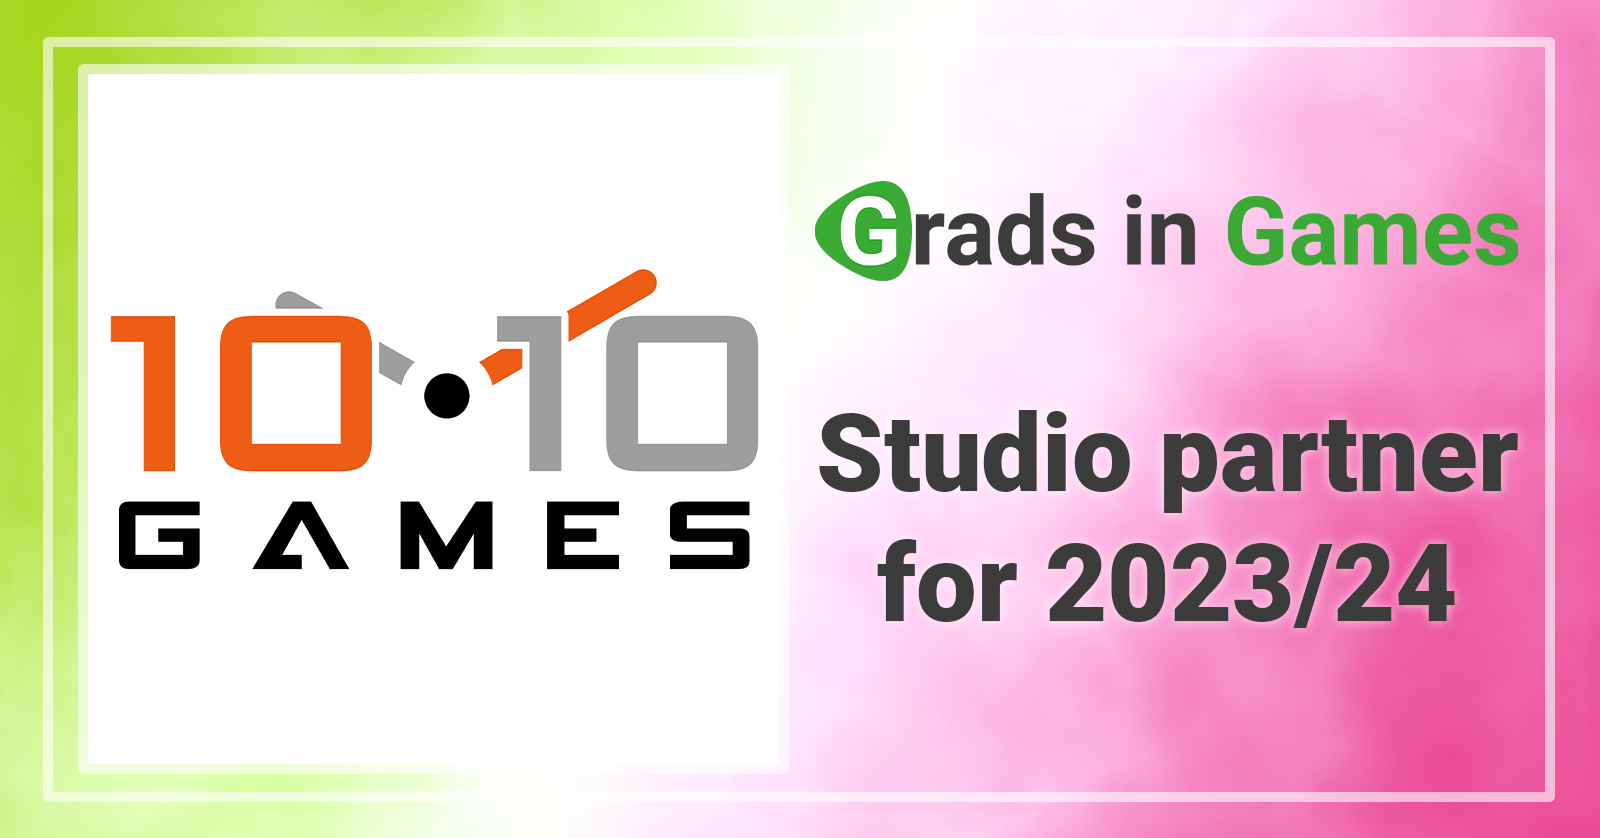 Welcome back to 10:10 Games as a partner studio!